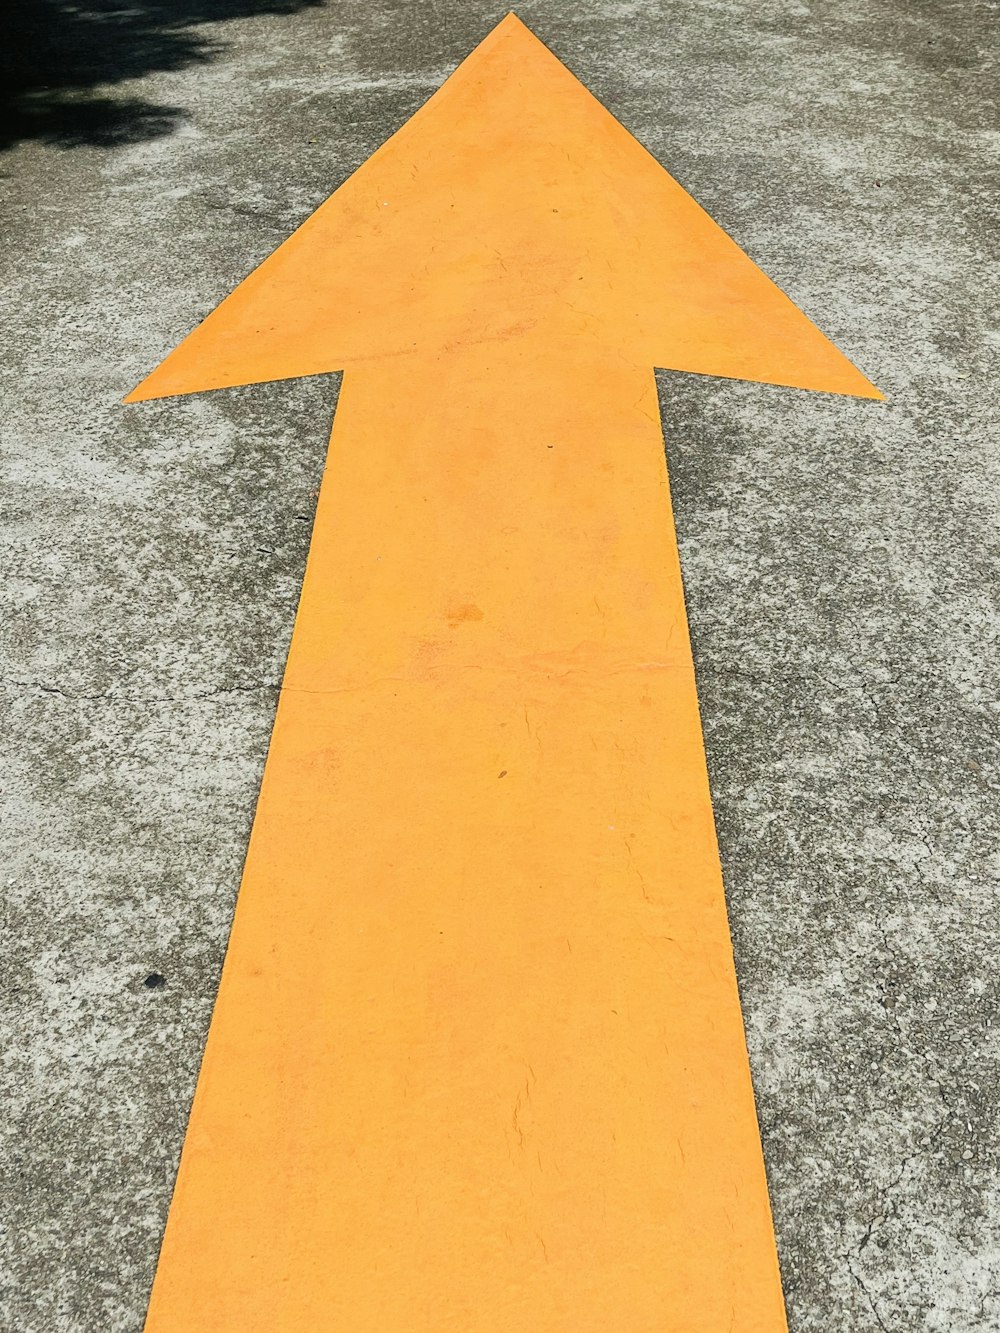 a yellow arrow painted on the ground in a parking lot